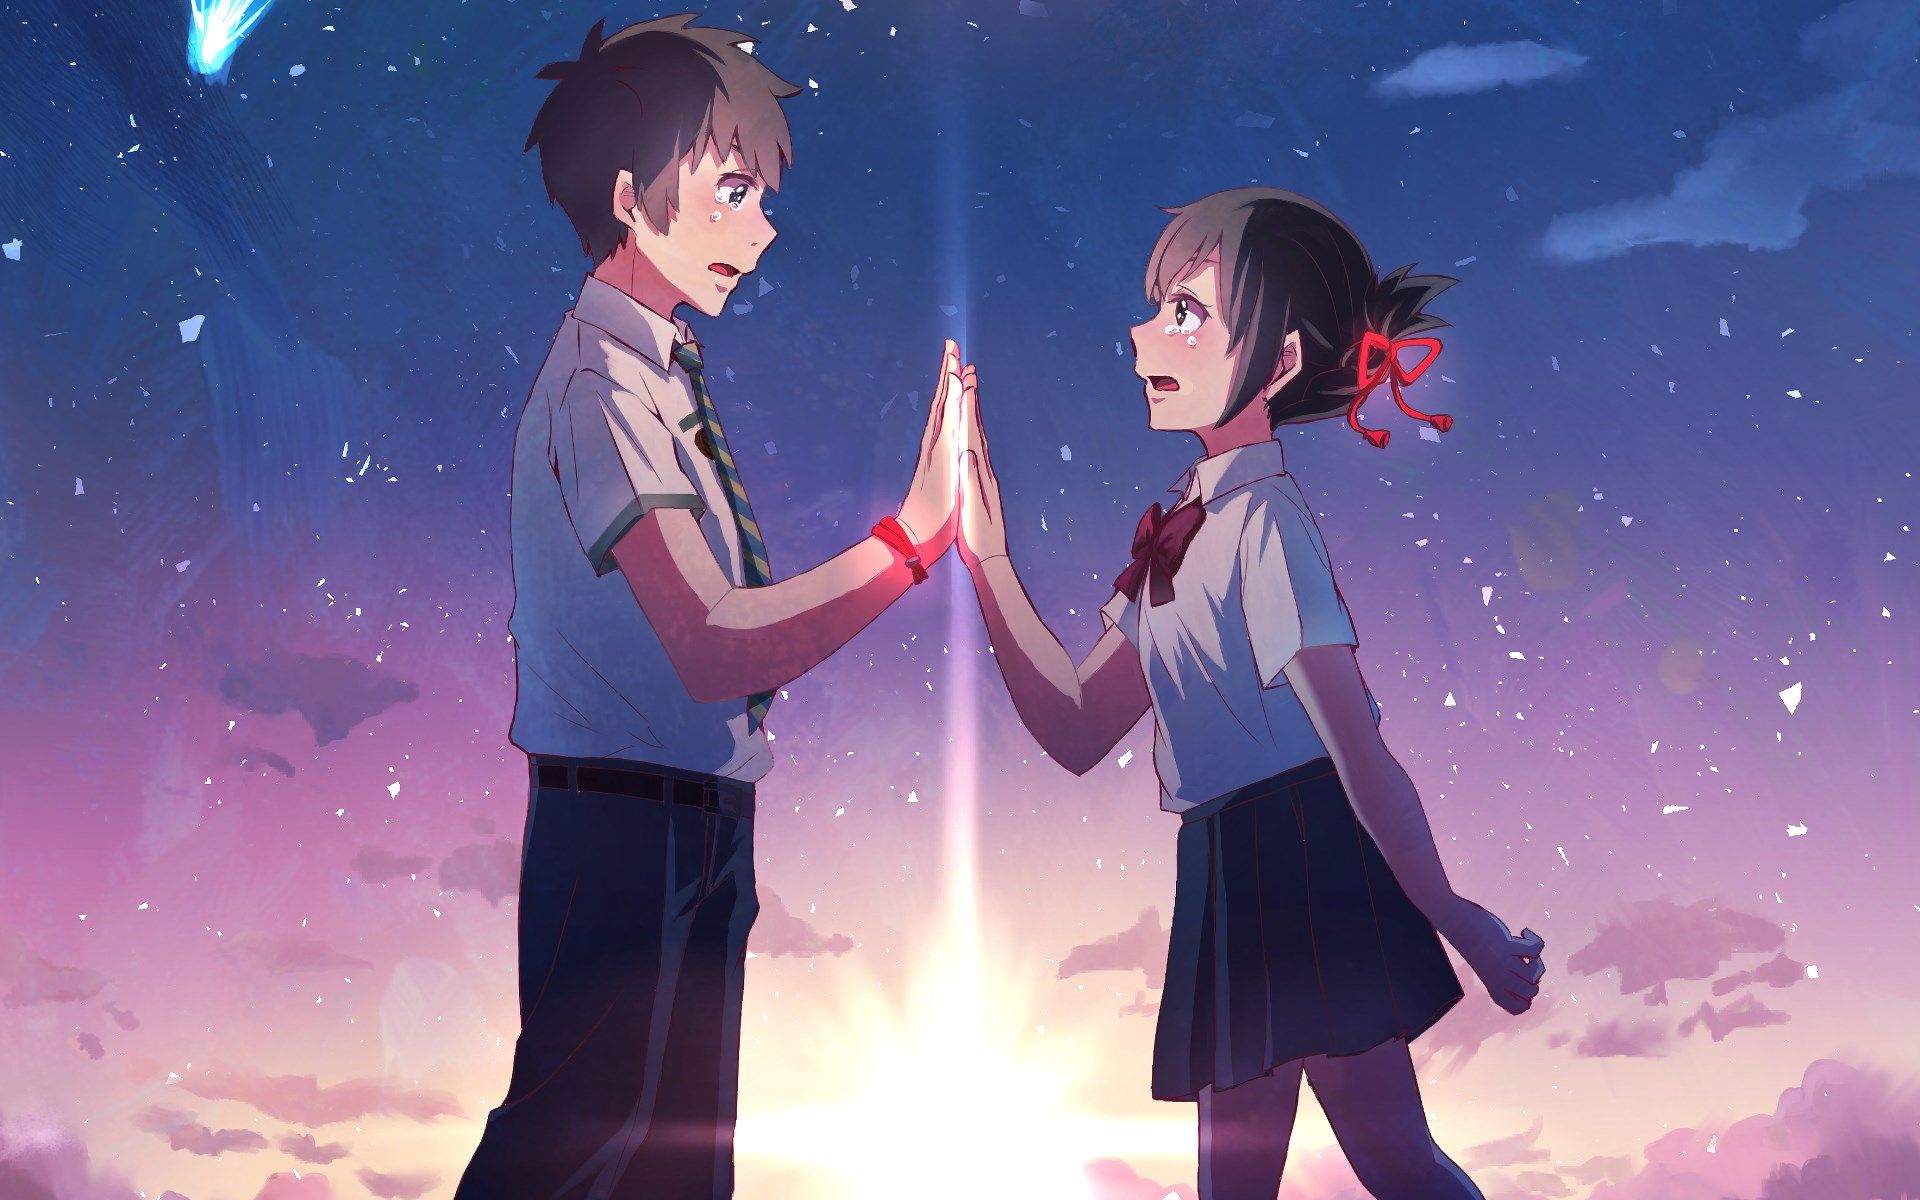 A scene from the anime film 'Your Name' where two teenagers high five in the sky. - 1920x1200